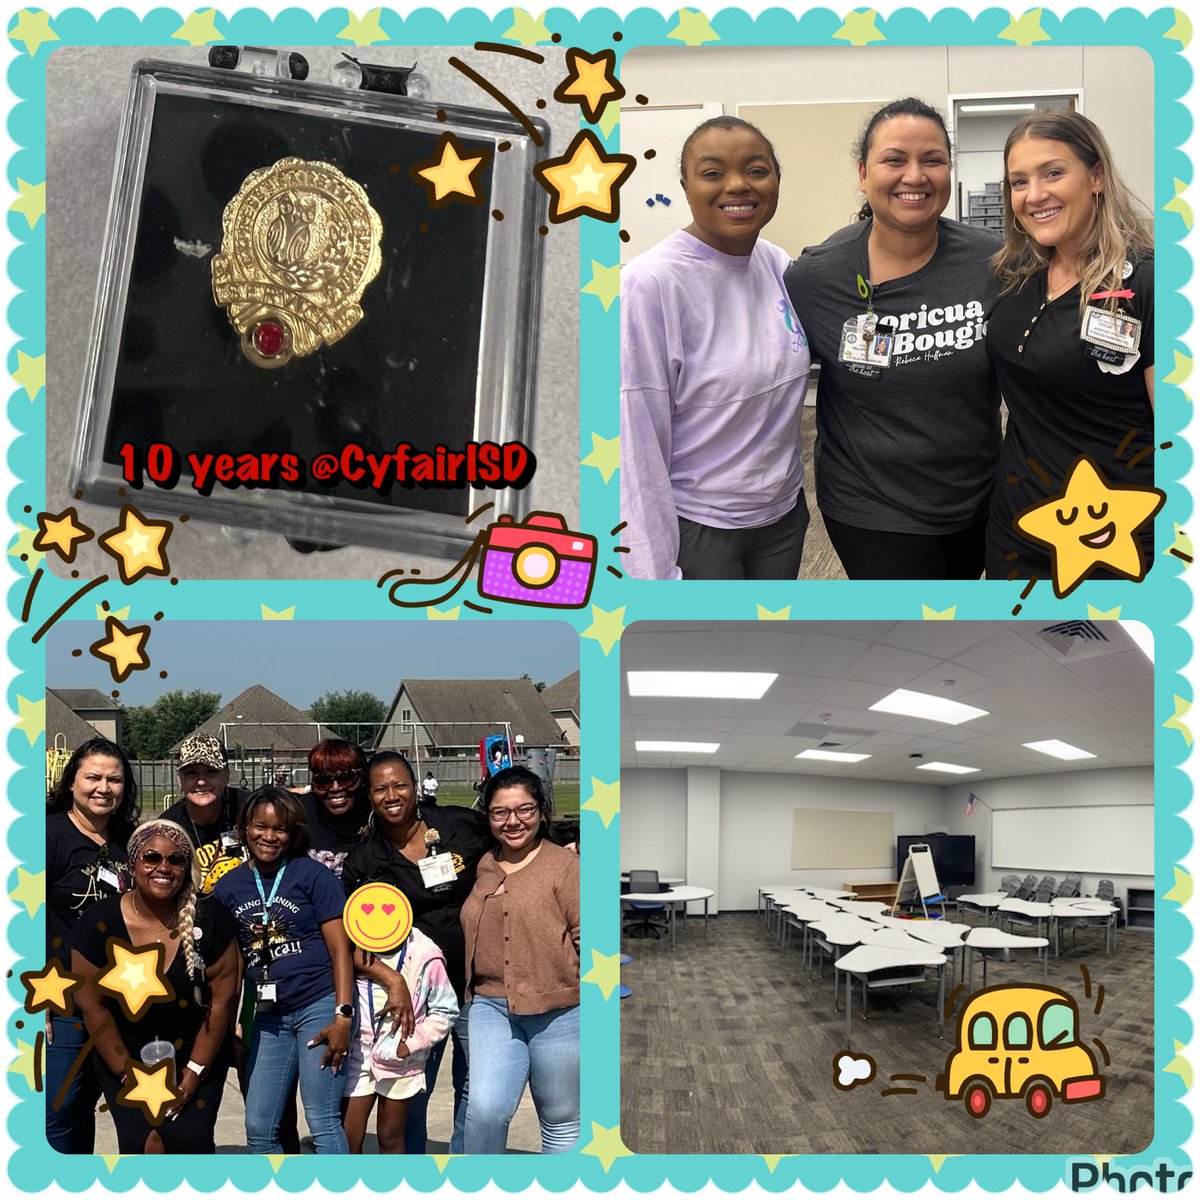 That’s a wrap of 12 years teaching and 10 years @CFISDAndre. Thank you to the best 2nd grade team and assistant principal. Here is to summer and some much needed relaxation. @CyFairISD #2ndtonone #Bringingoutthebest